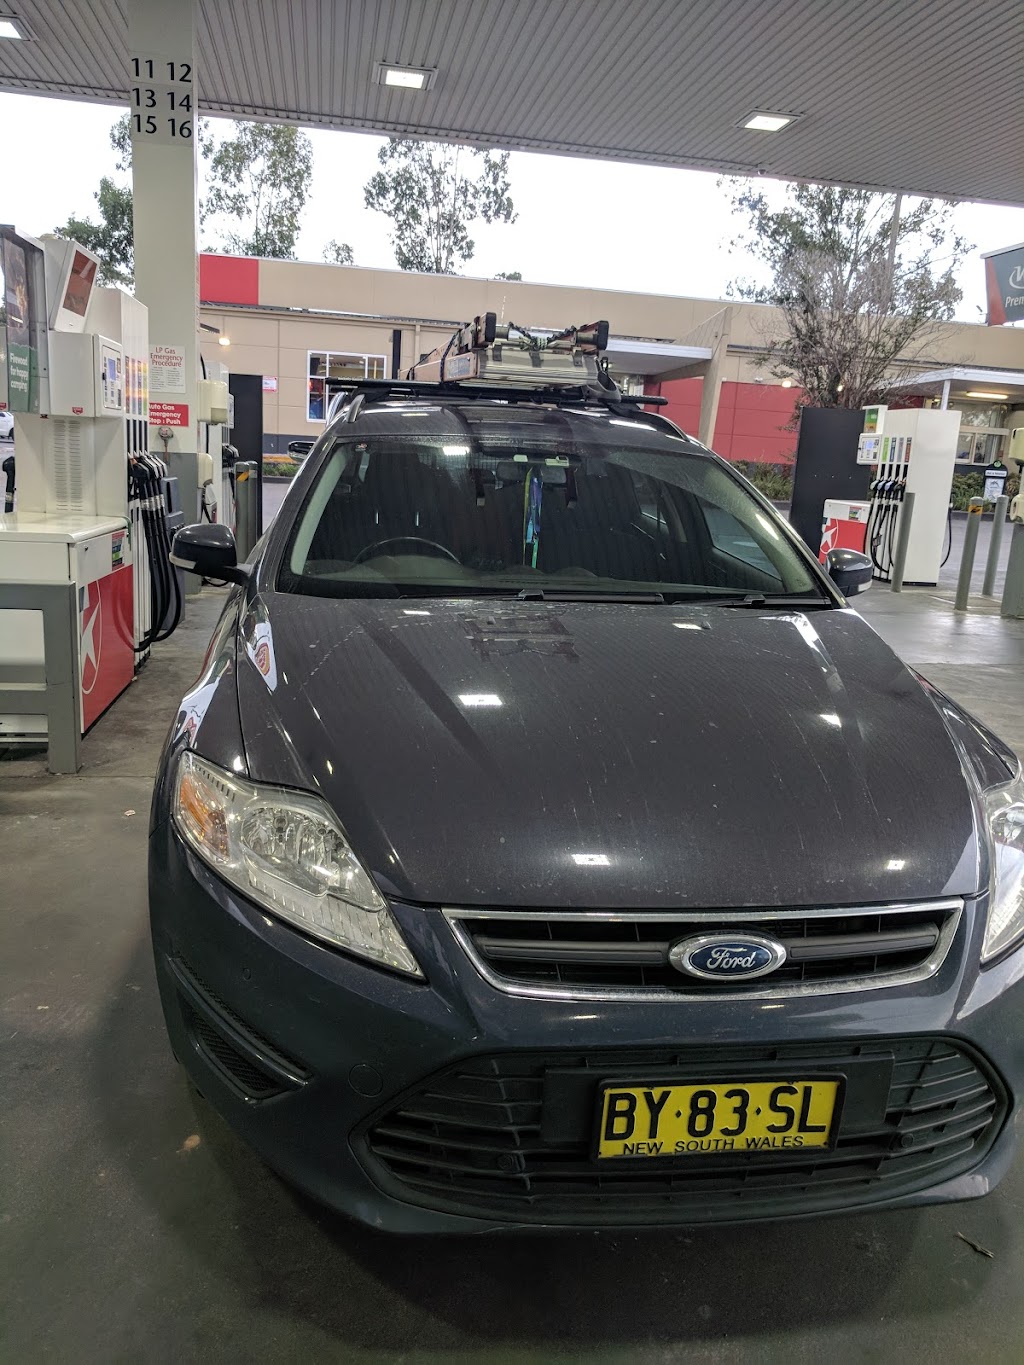 Caltex Woolworths | gas station | 66 Parker St, Penrith NSW 2747, Australia | 0247211505 OR +61 2 4721 1505